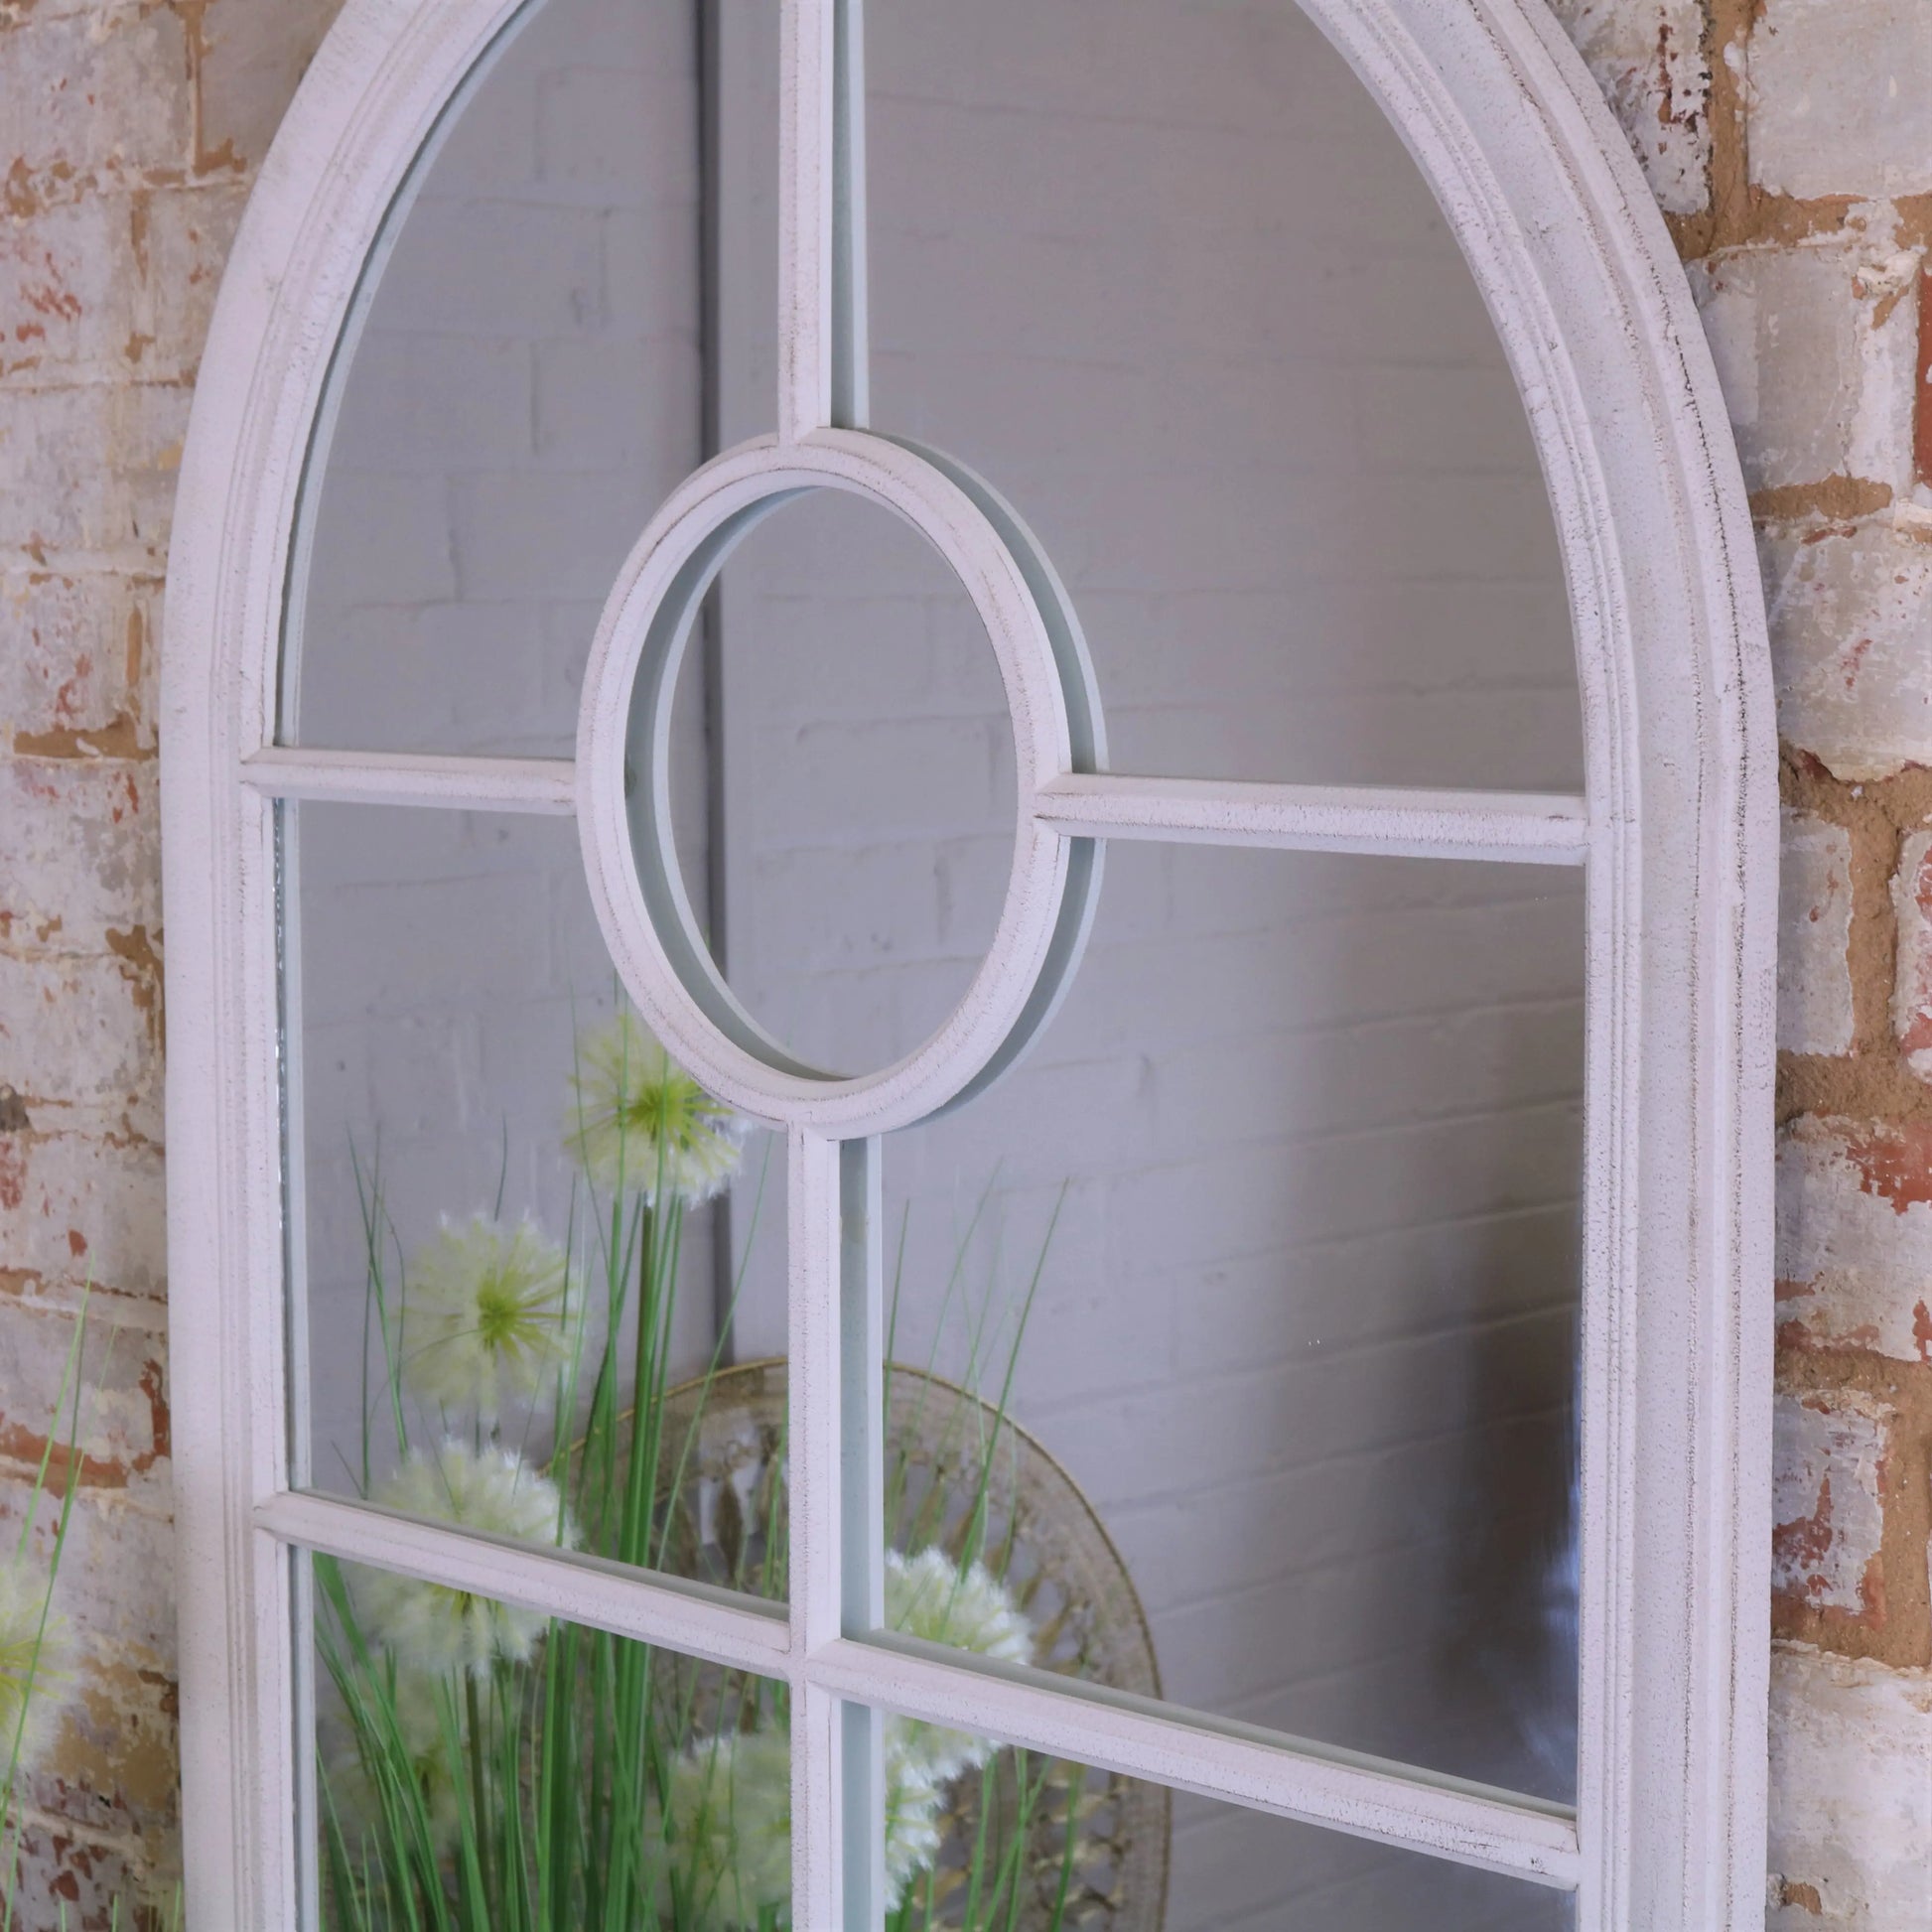 Panna Window Style Wall Mirror Rustic Zoomed In of Circle Section